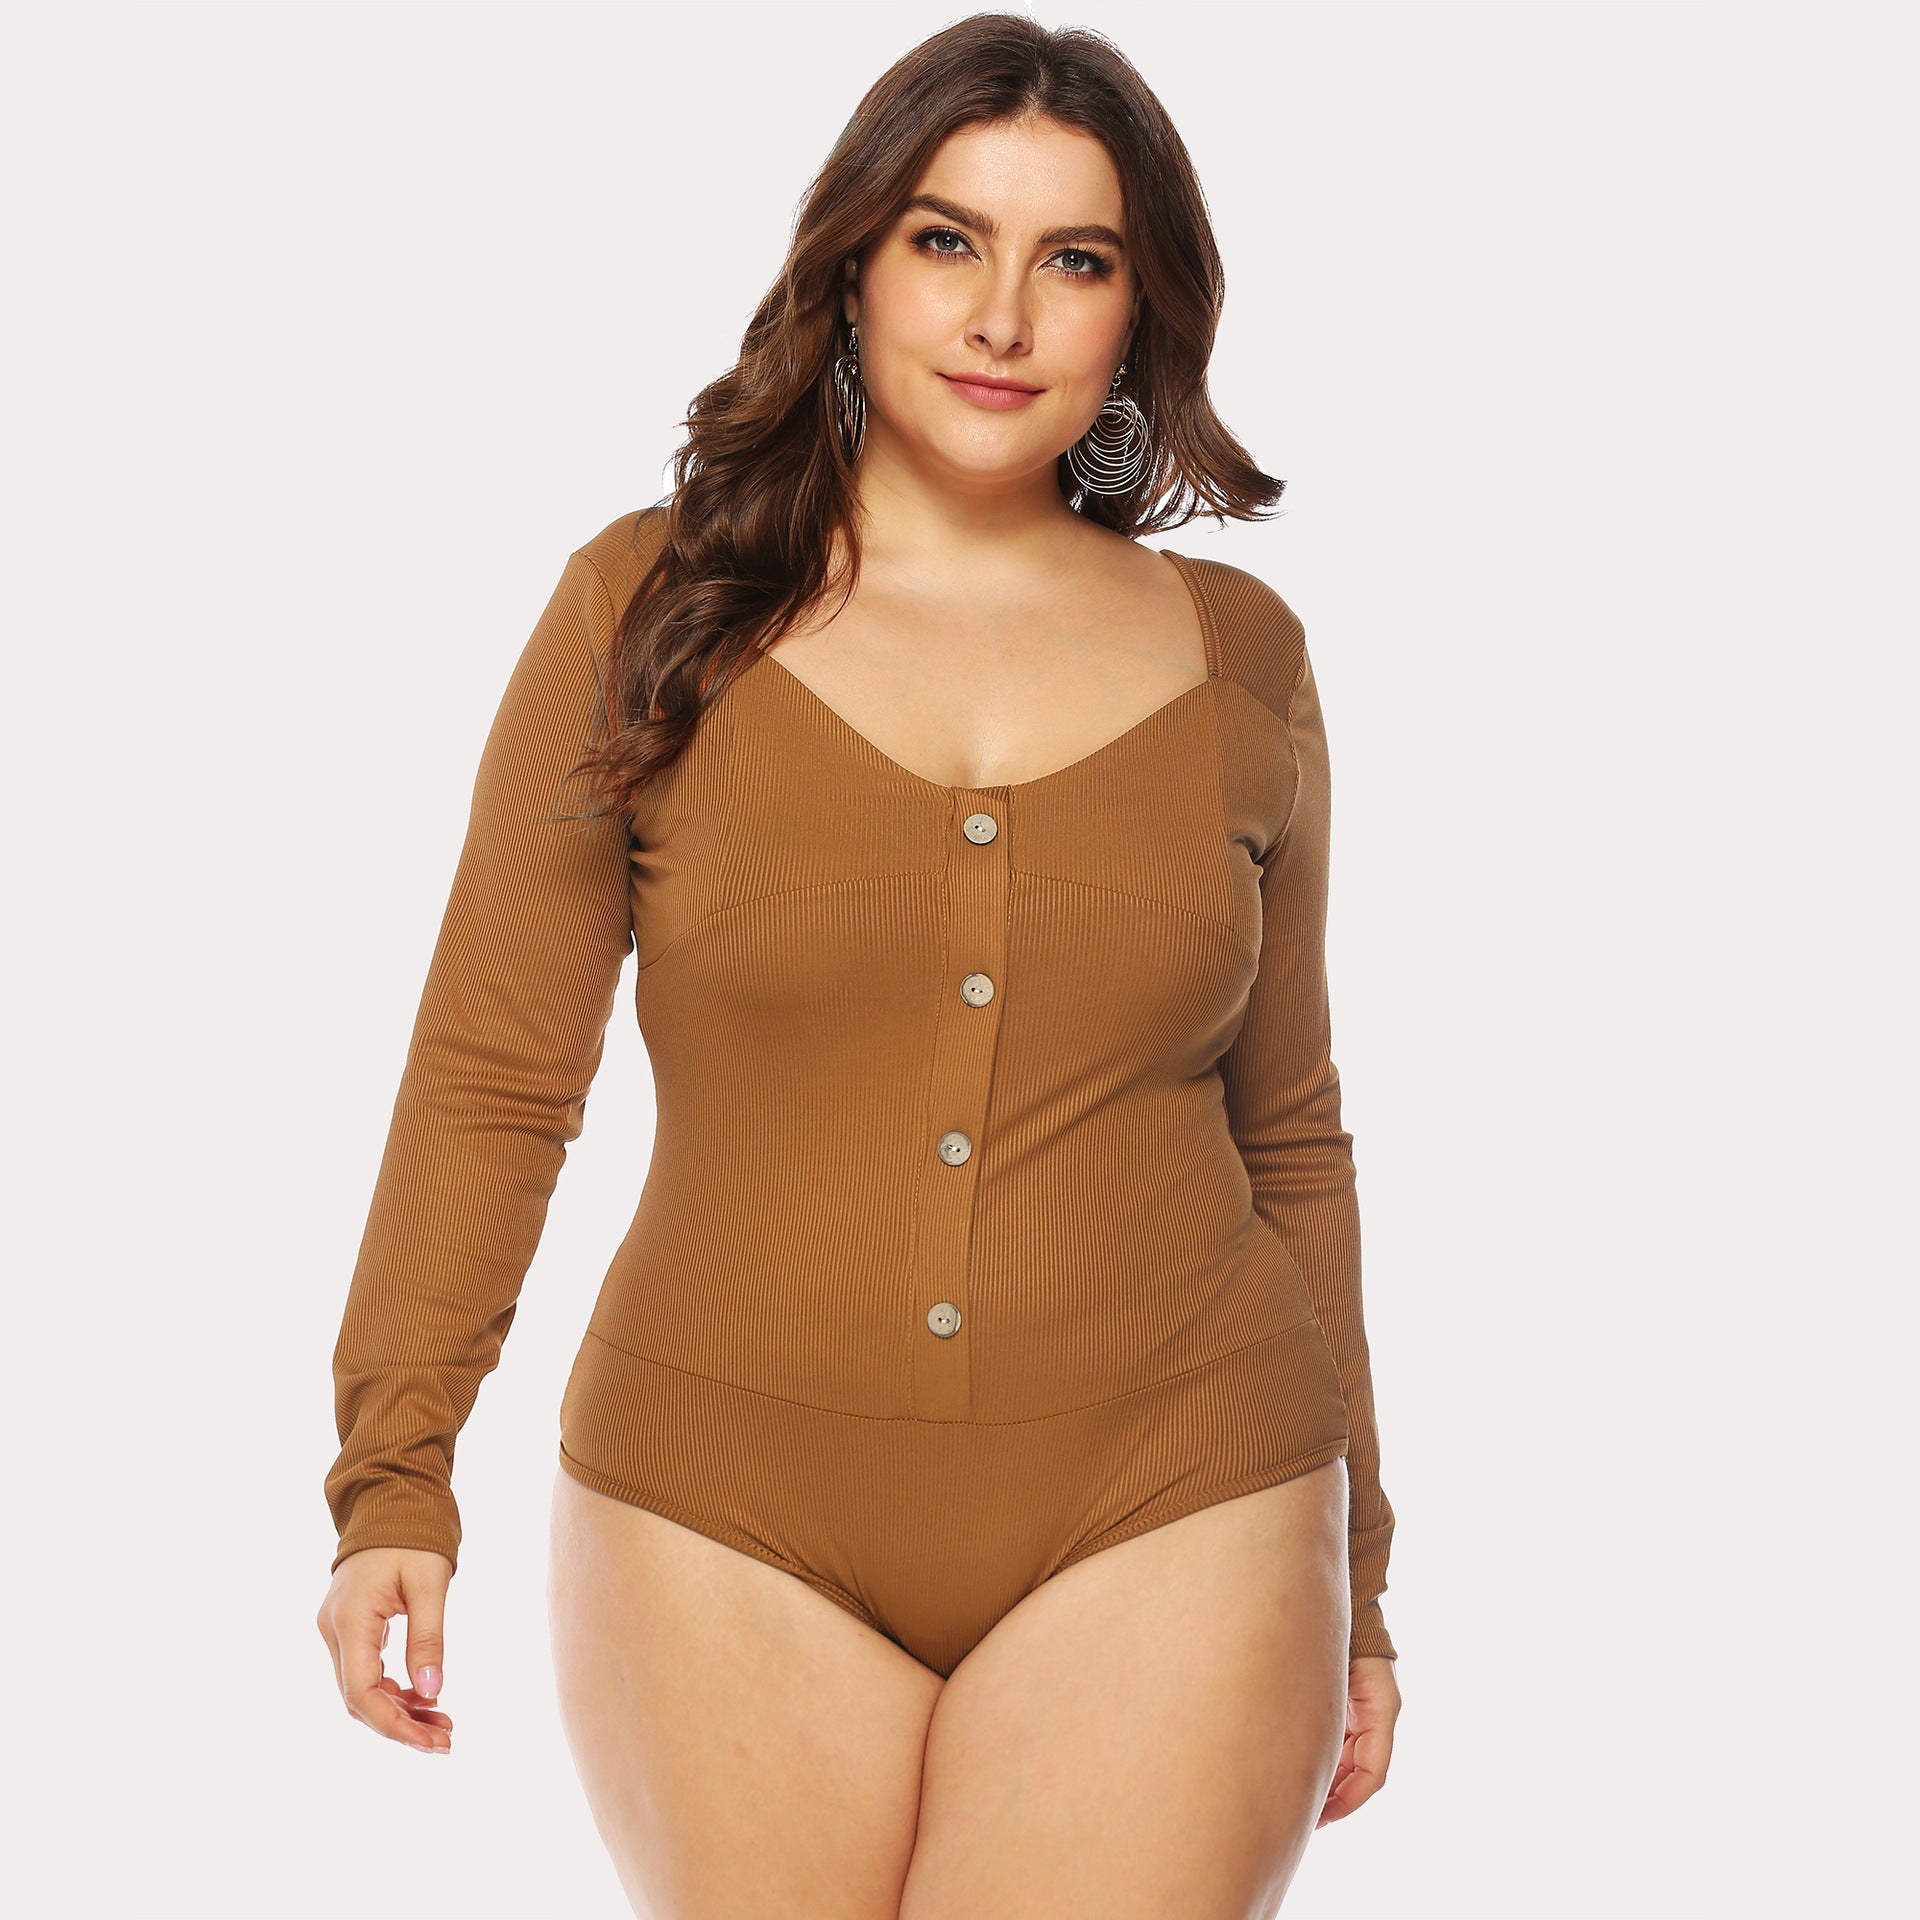 Plus Size Women Long Sleeve Deep U Backless Button Jumpsuit Deep V Plunge Plunge Casual All-Match Bottoming Shirt